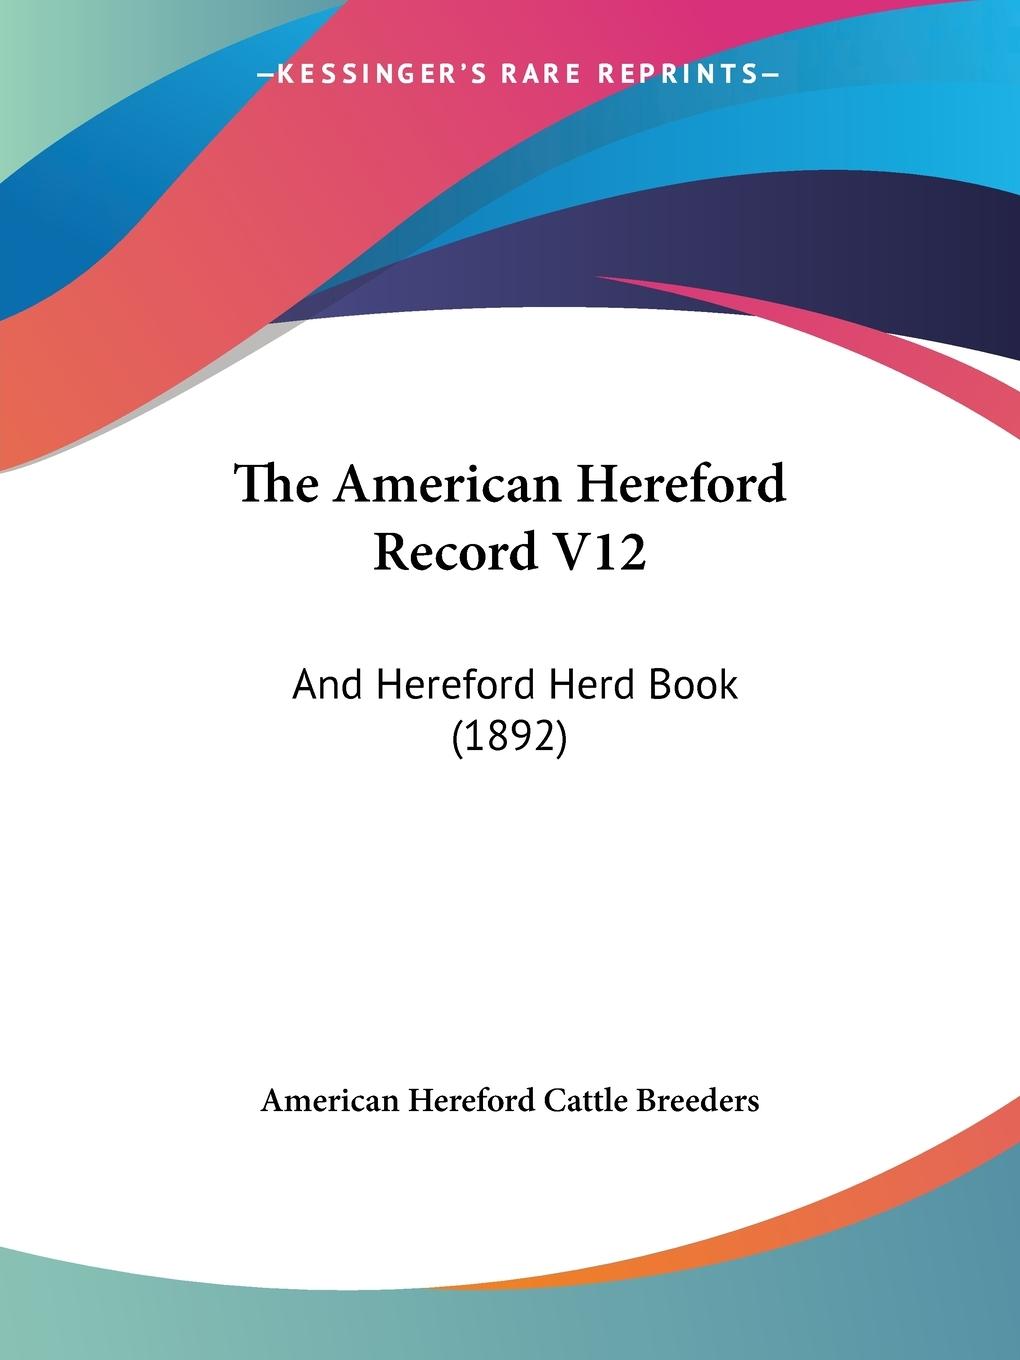 The American Hereford Record V12 - American Hereford Cattle Breeders